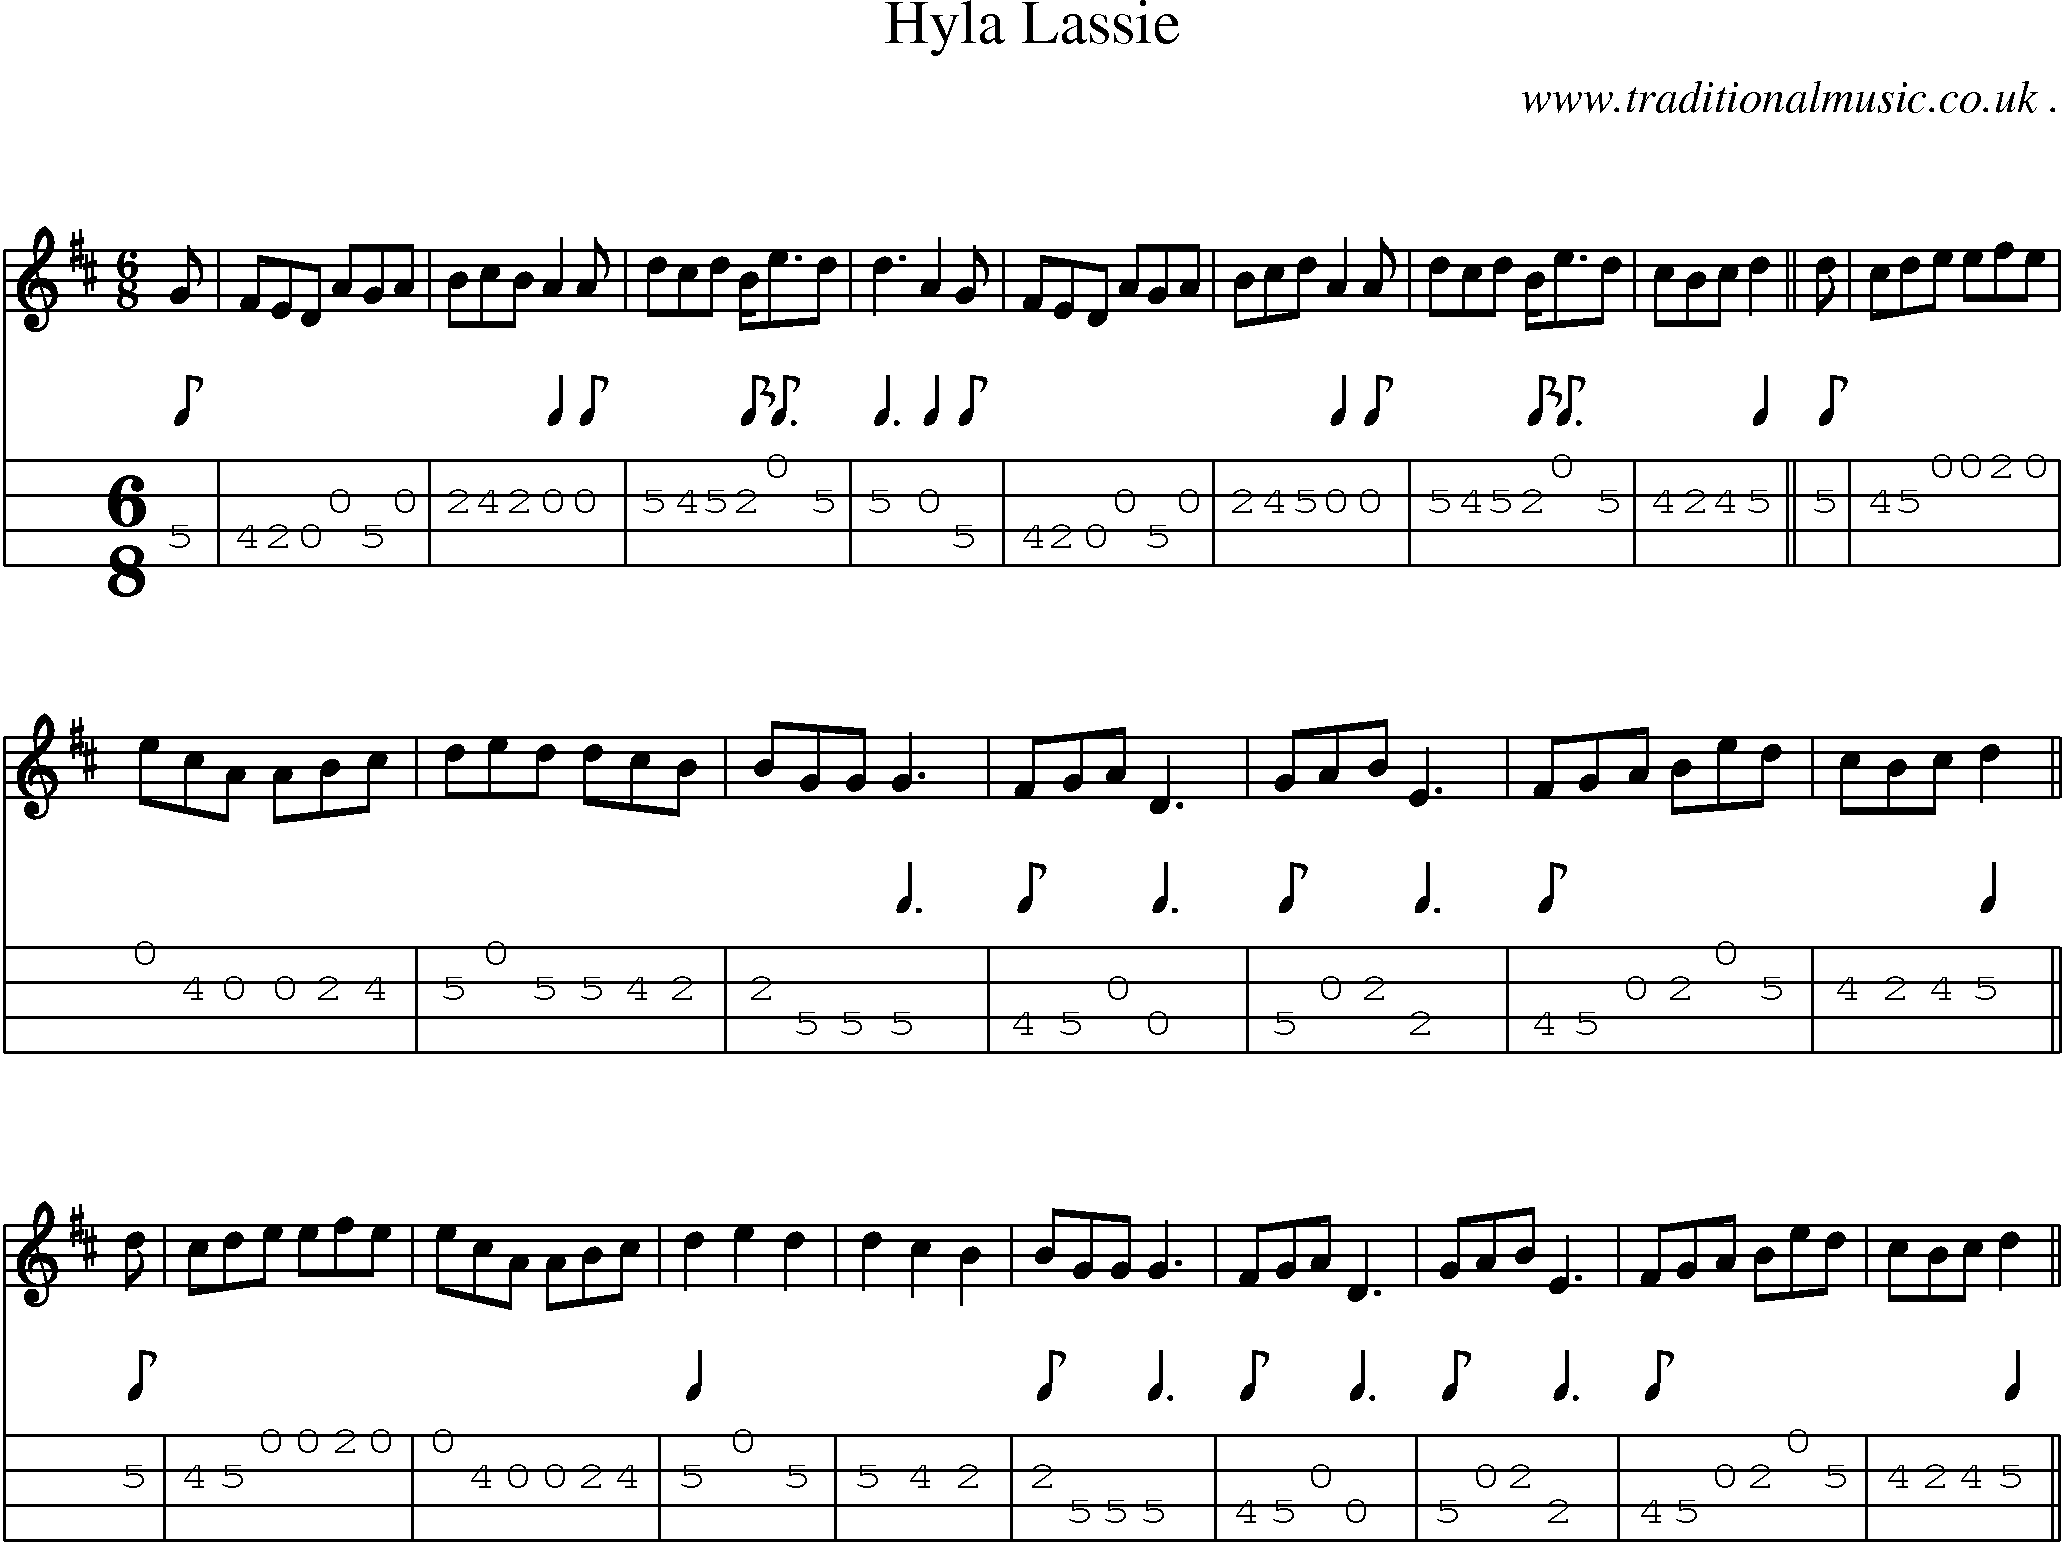 Sheet-Music and Mandolin Tabs for Hyla Lassie